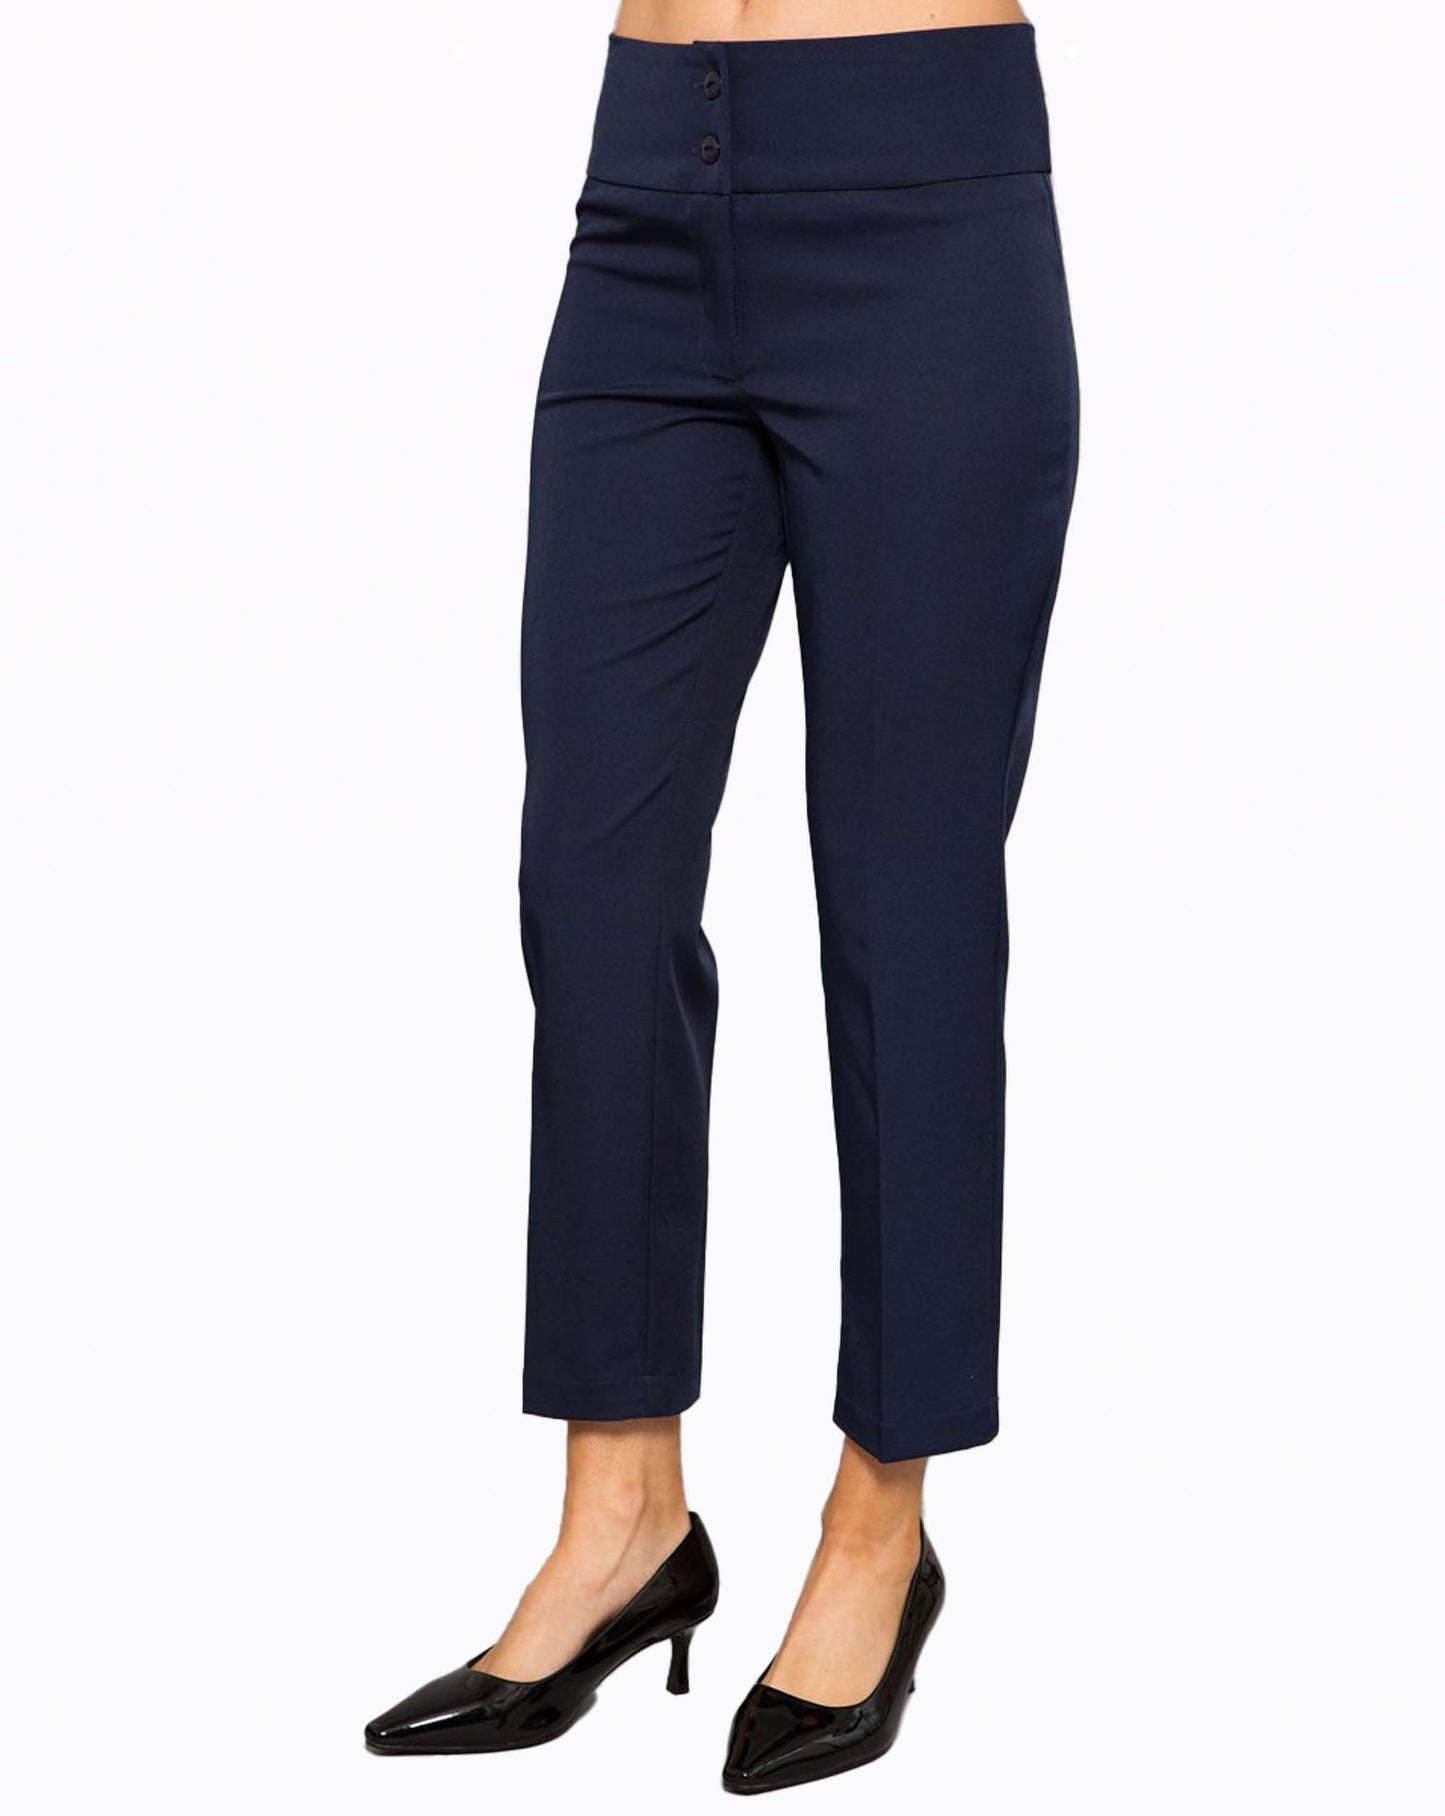 Signature Ankle Grazer Trousers (Luxury Twill)